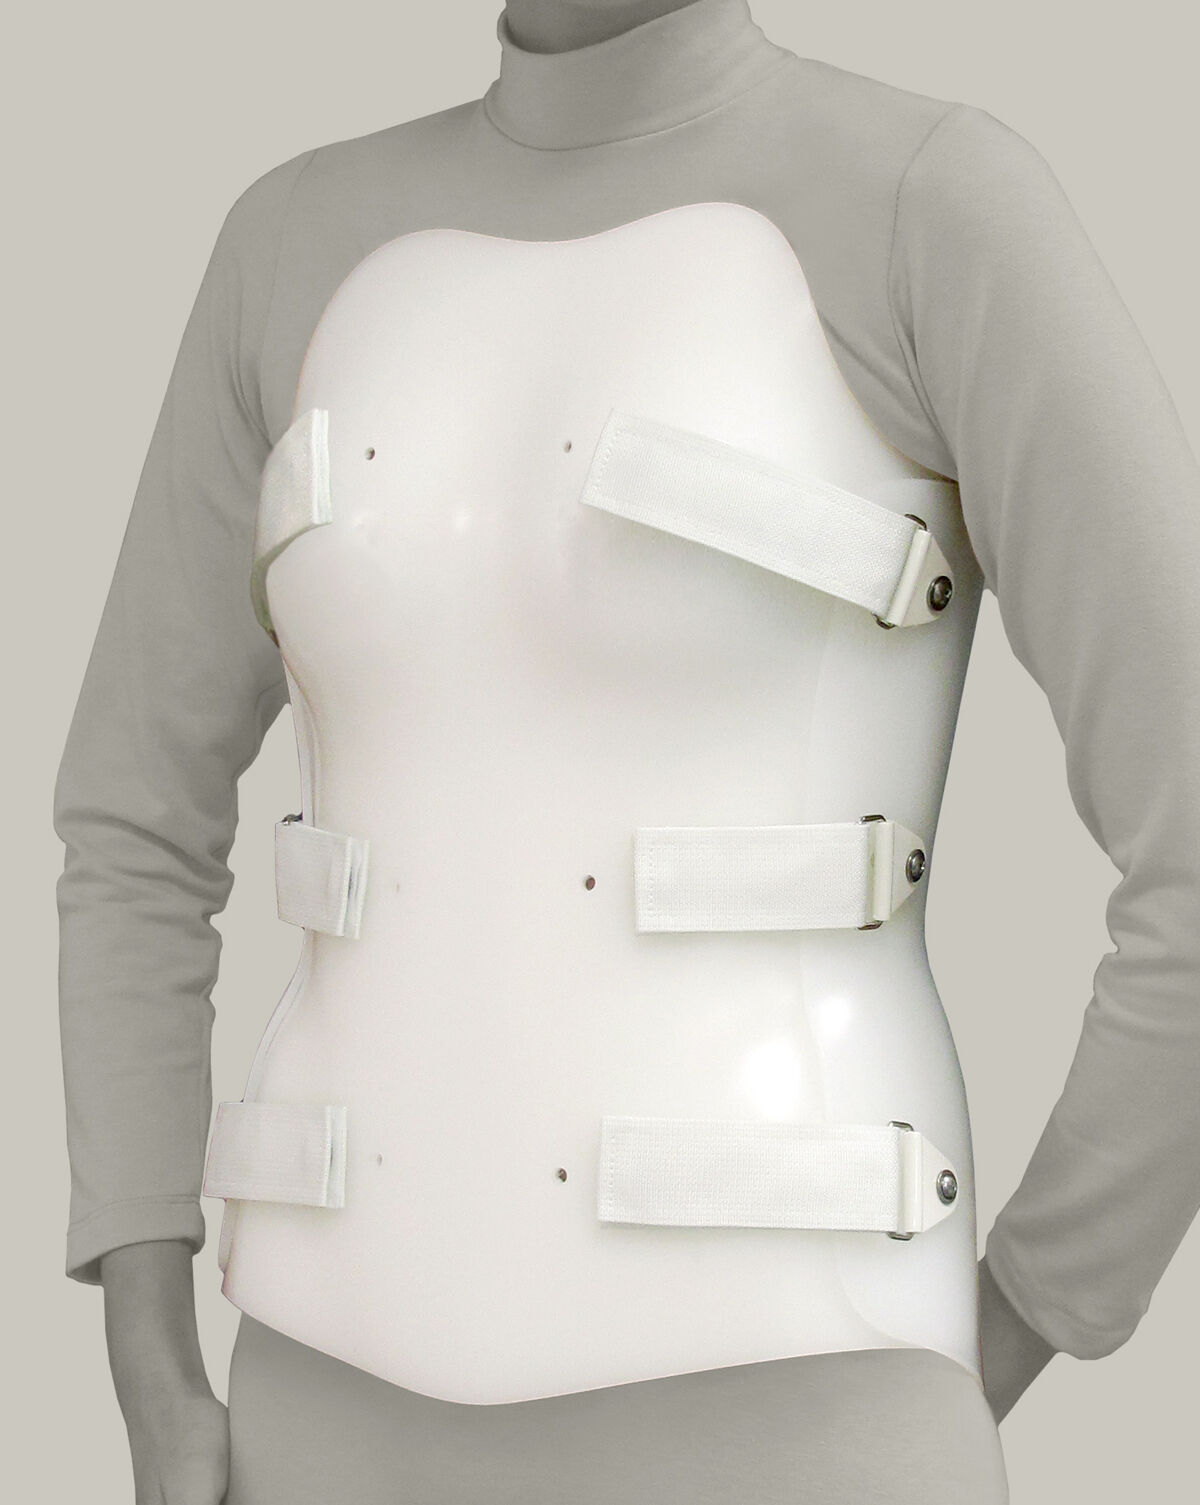 TLSO Thoracolumbar Fixed Spinal Brace, Lightweight Back Brace for Kyphosis,  Oste